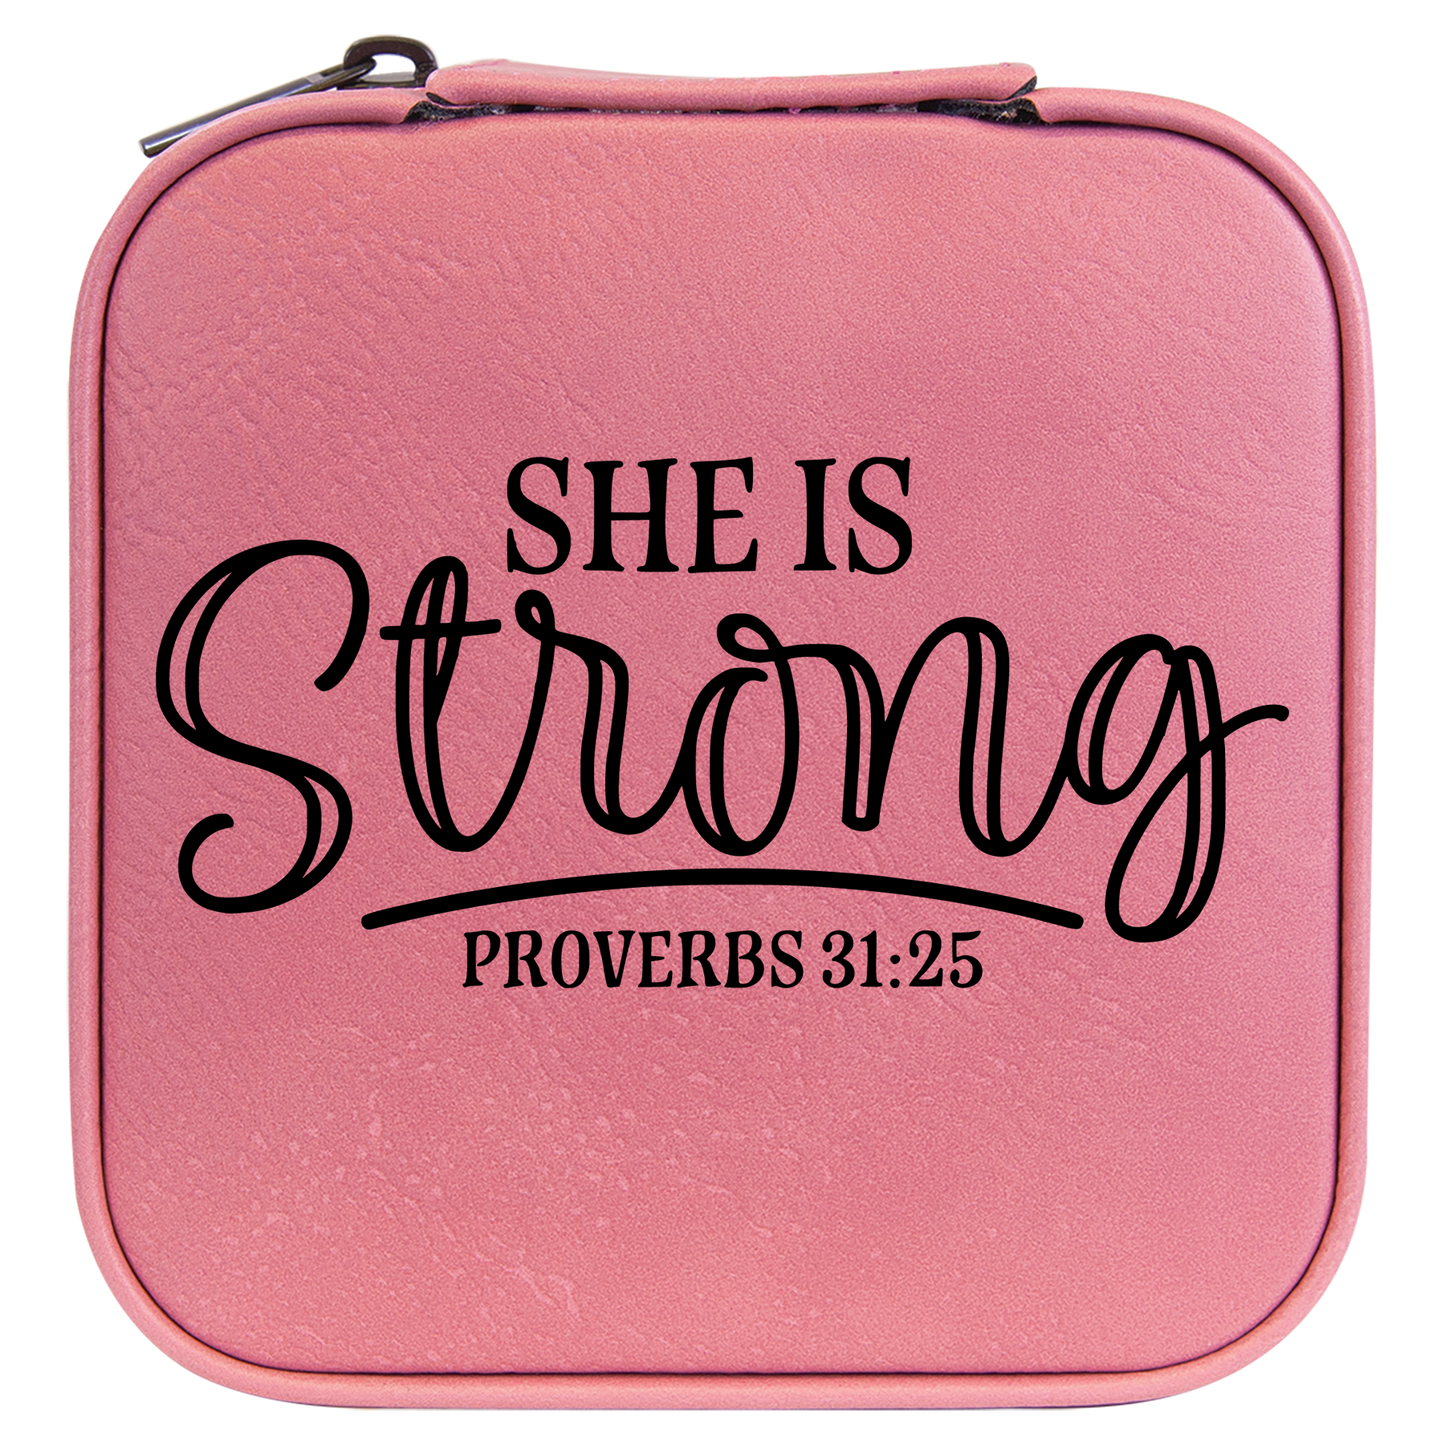 She Is Strong Travel Jewelry Box - Pink